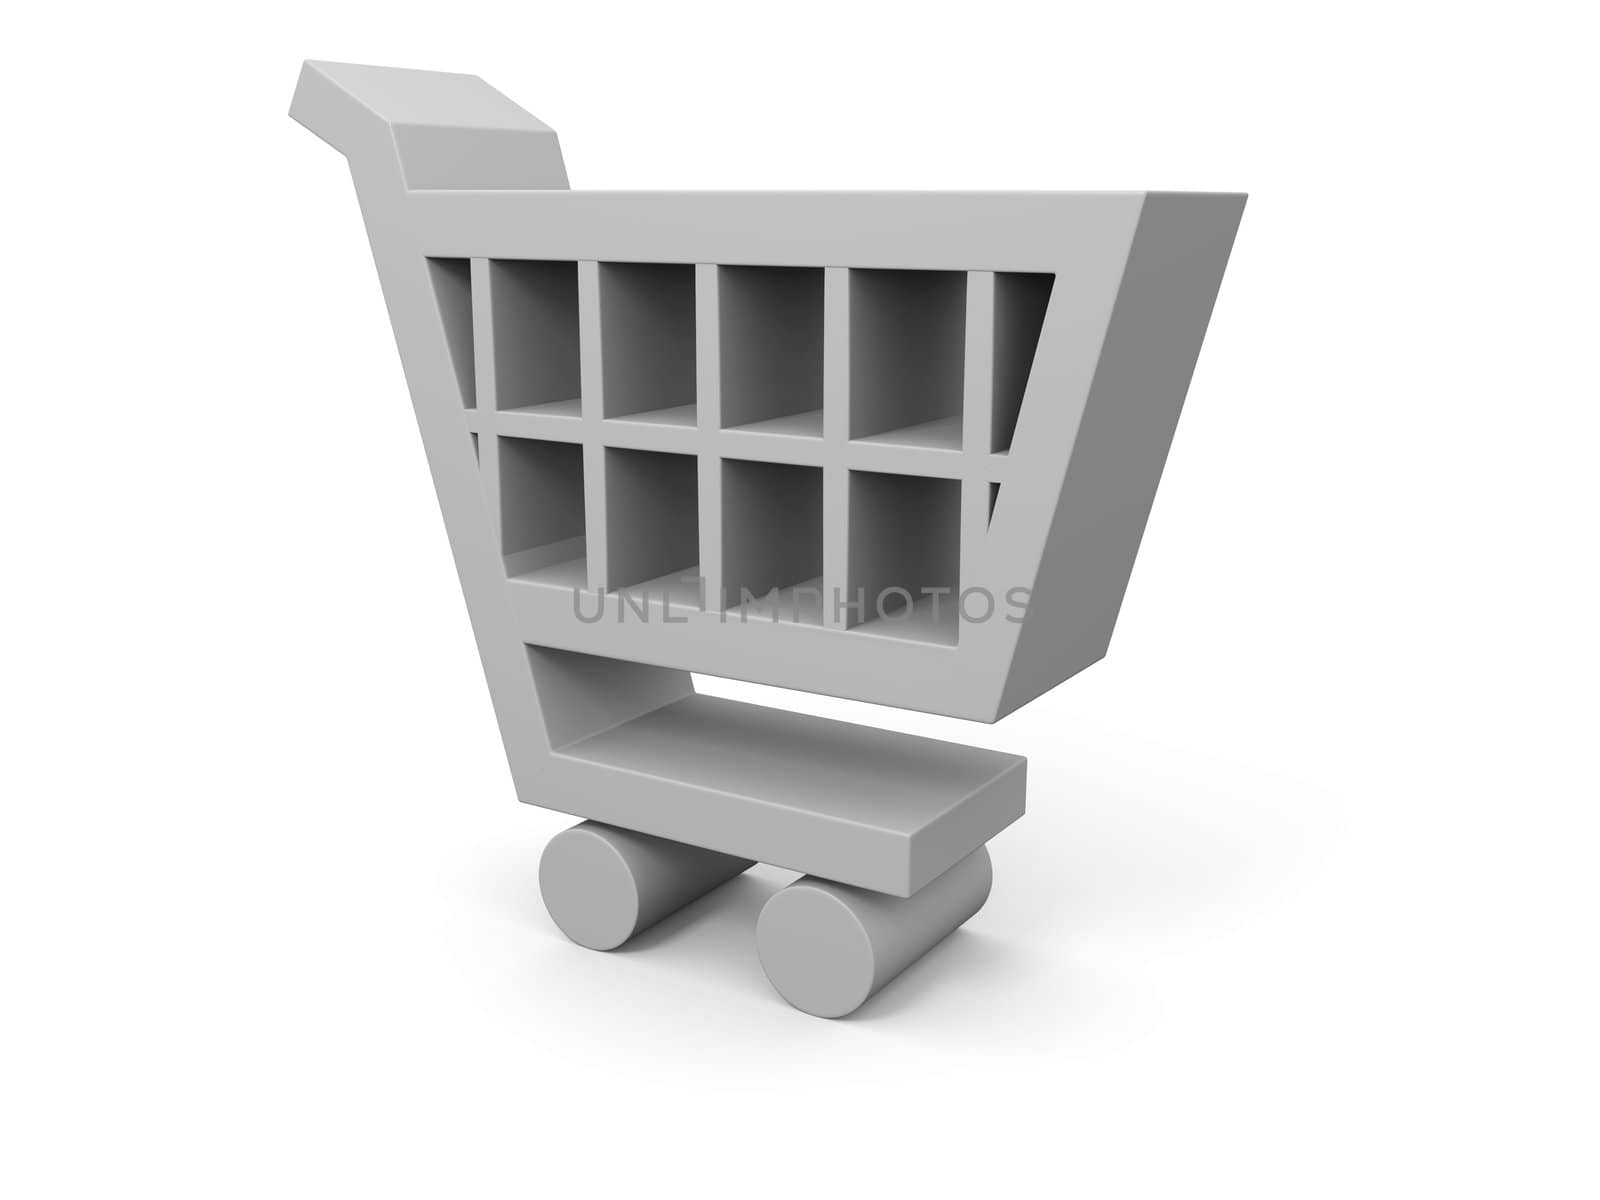 3D illustration of shopping cart by Harvepino